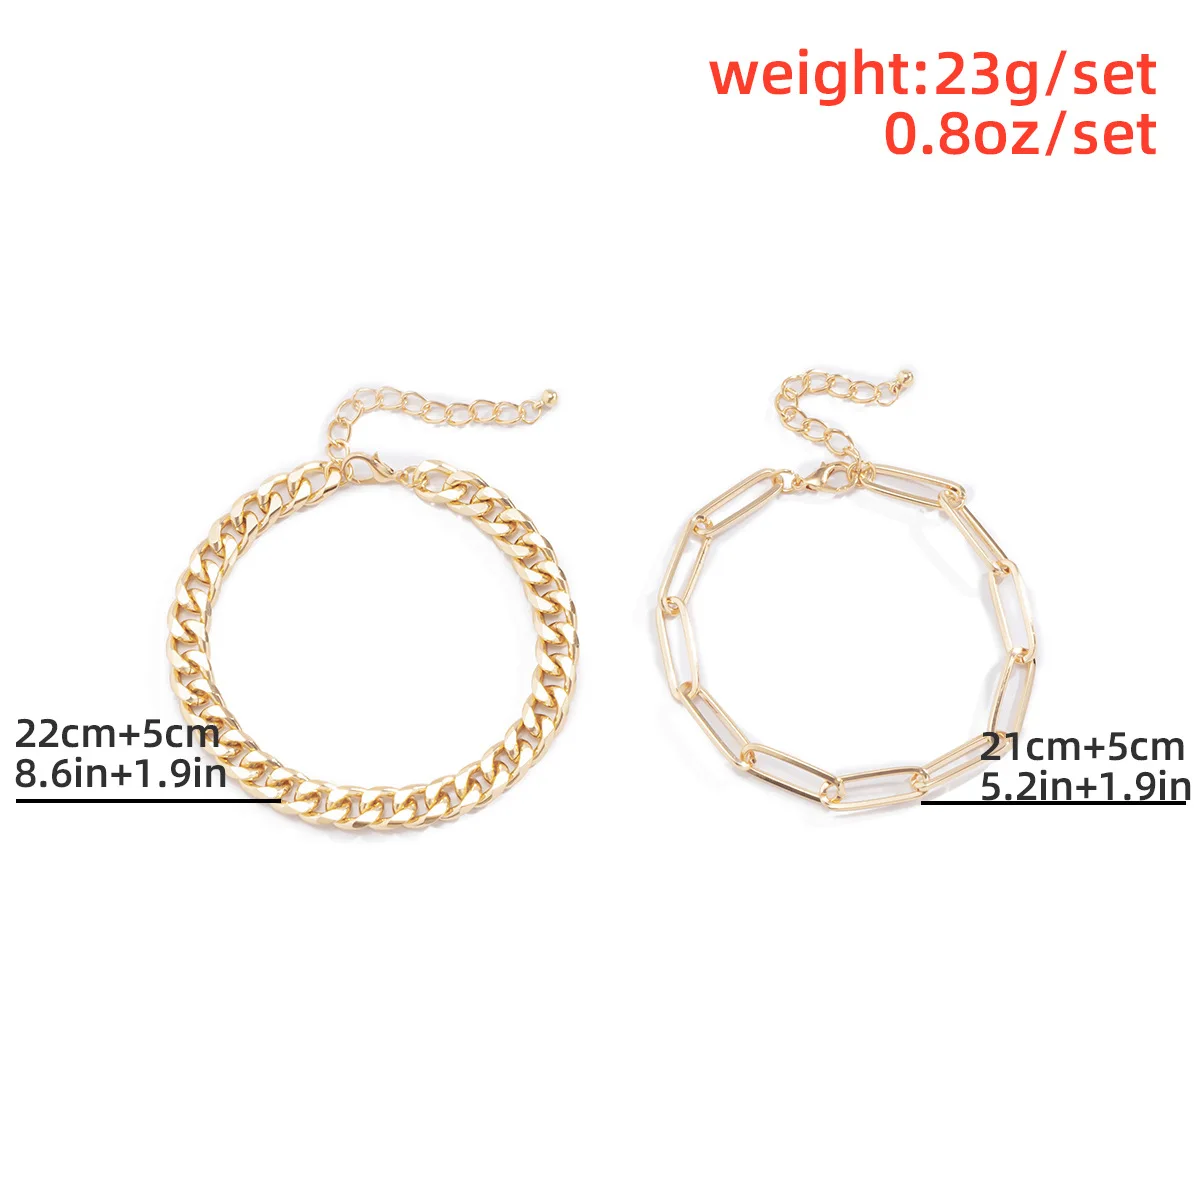 Multilayer Gold Color Metal Hollow Cross Chain Anklet For Men Retro Simple Creative Bracelet Charm Girl Fashion Jewelry Gift